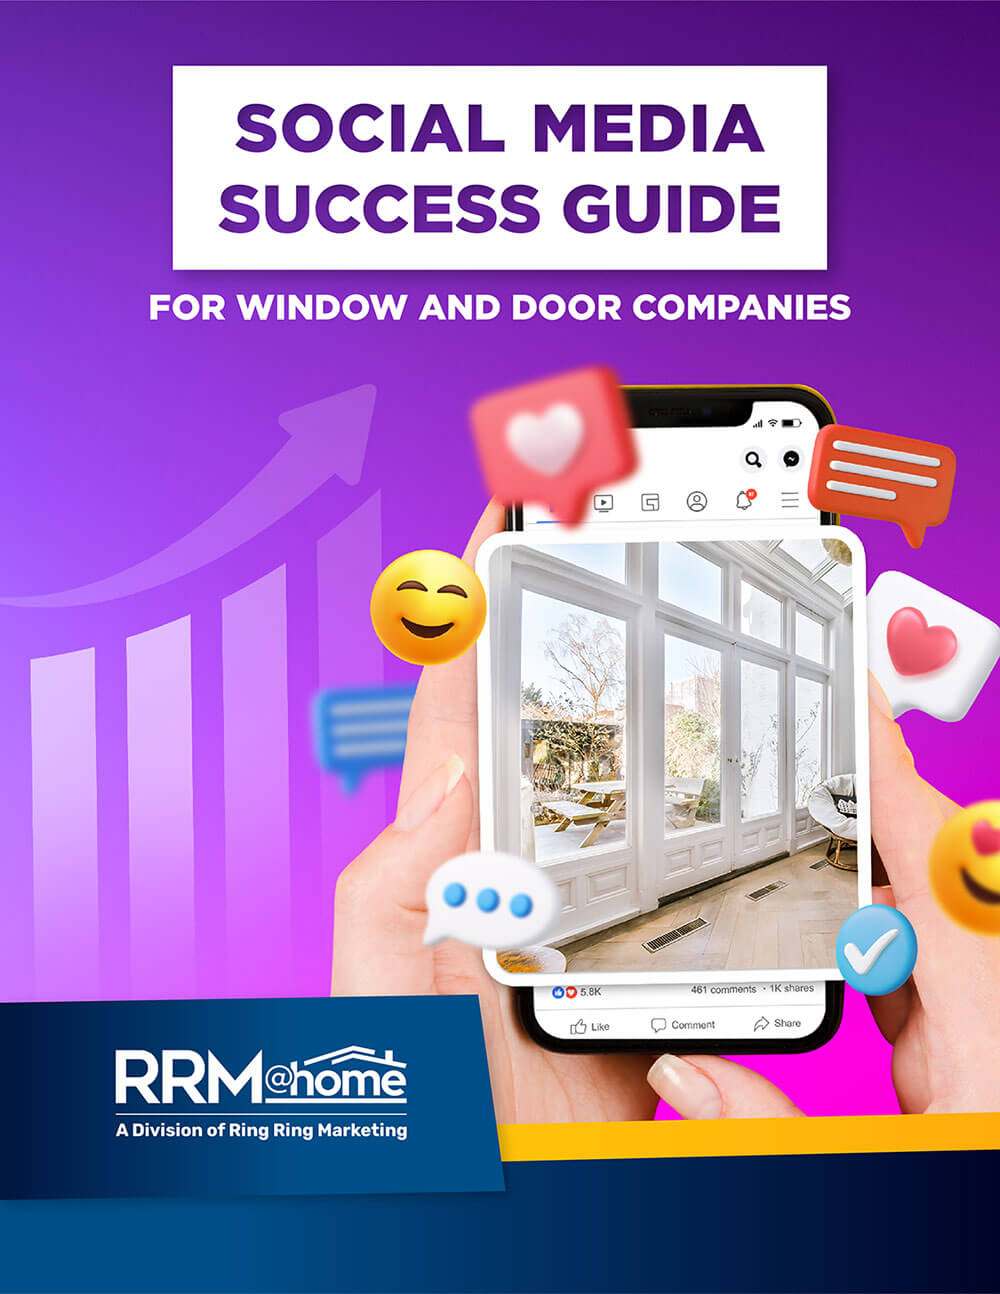 Social Media Success Guide for Window and Door Companies